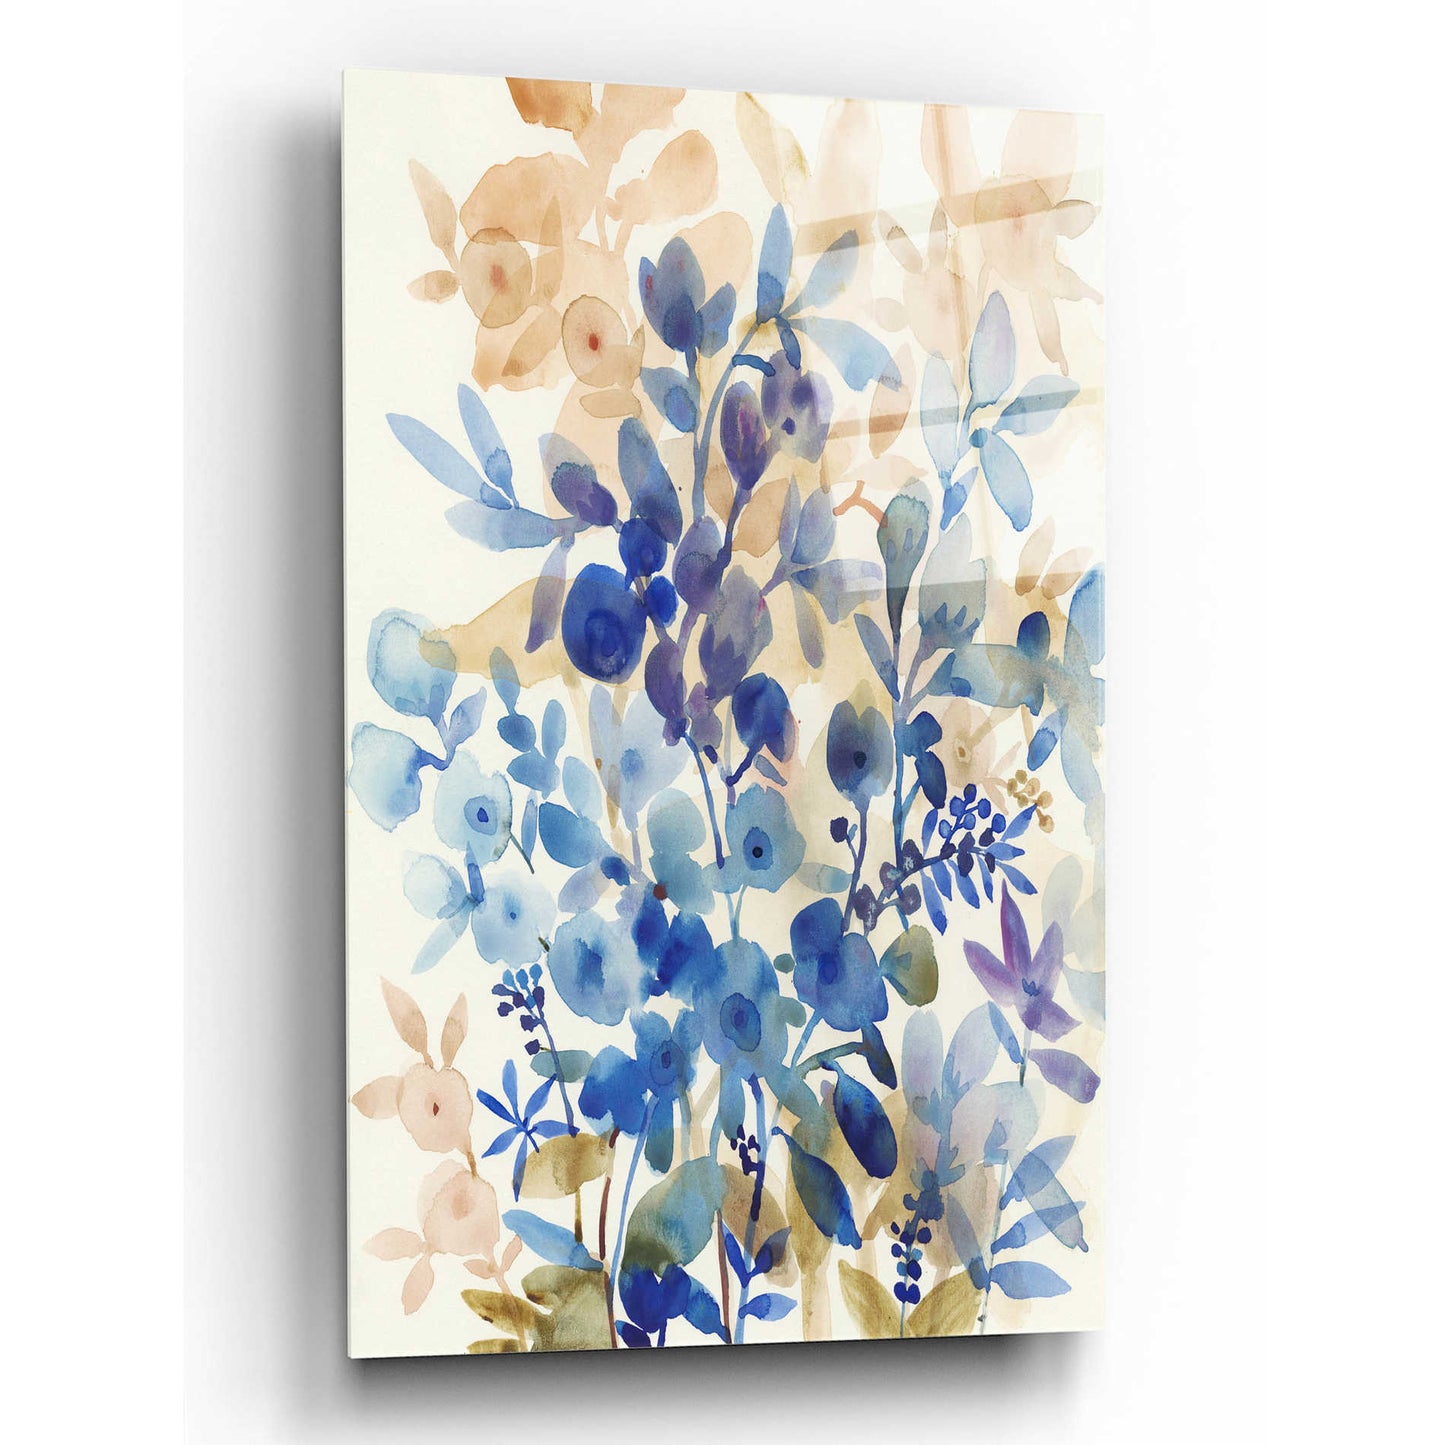 Epic Art 'Blueberry Floral I' by Tim O'Toole, Acrylic Glass Wall Art,12x16